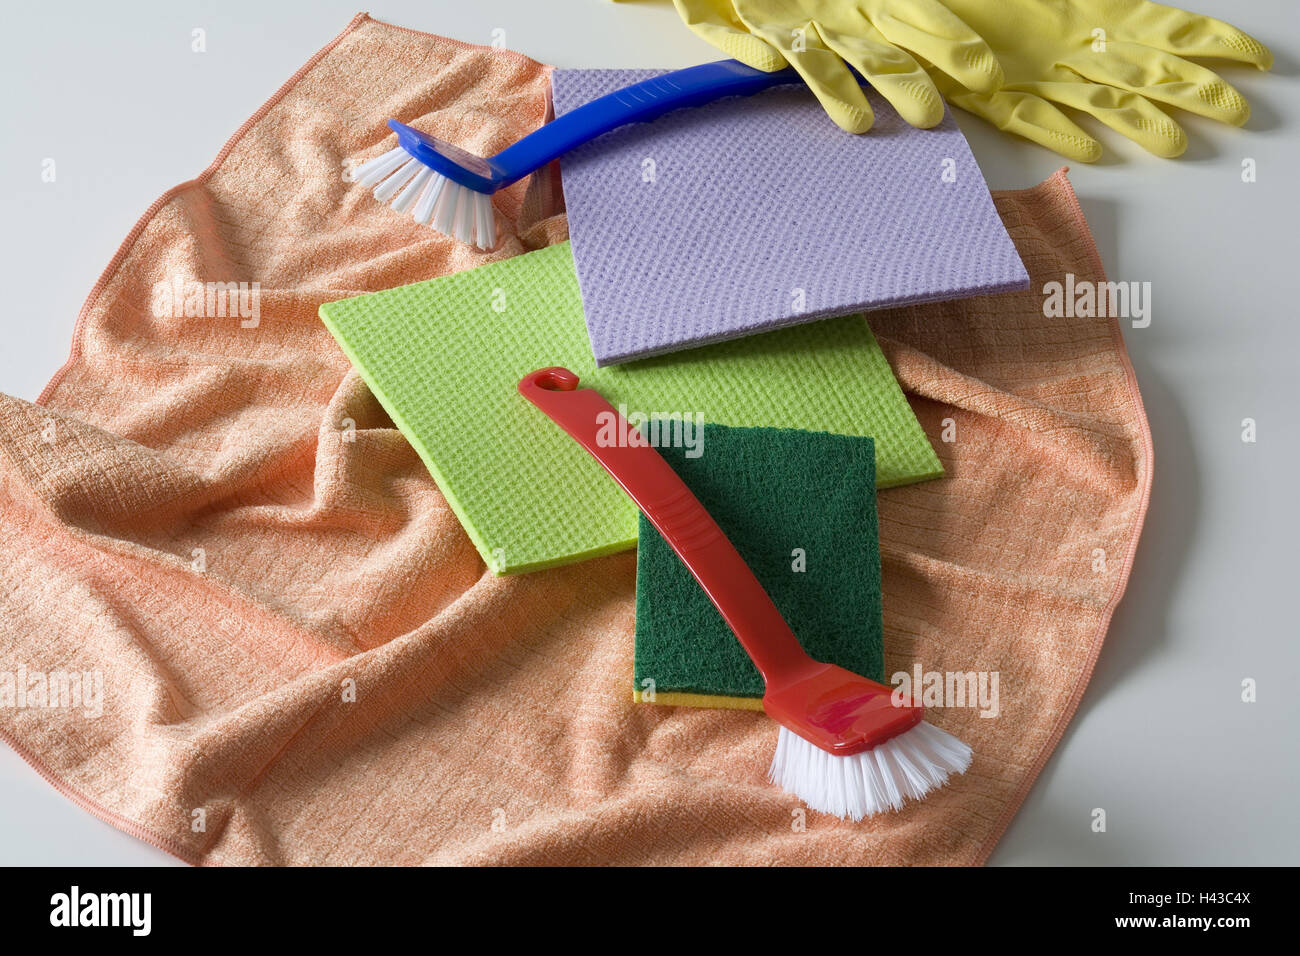 Cleaning implements, different ones, Stock Photo